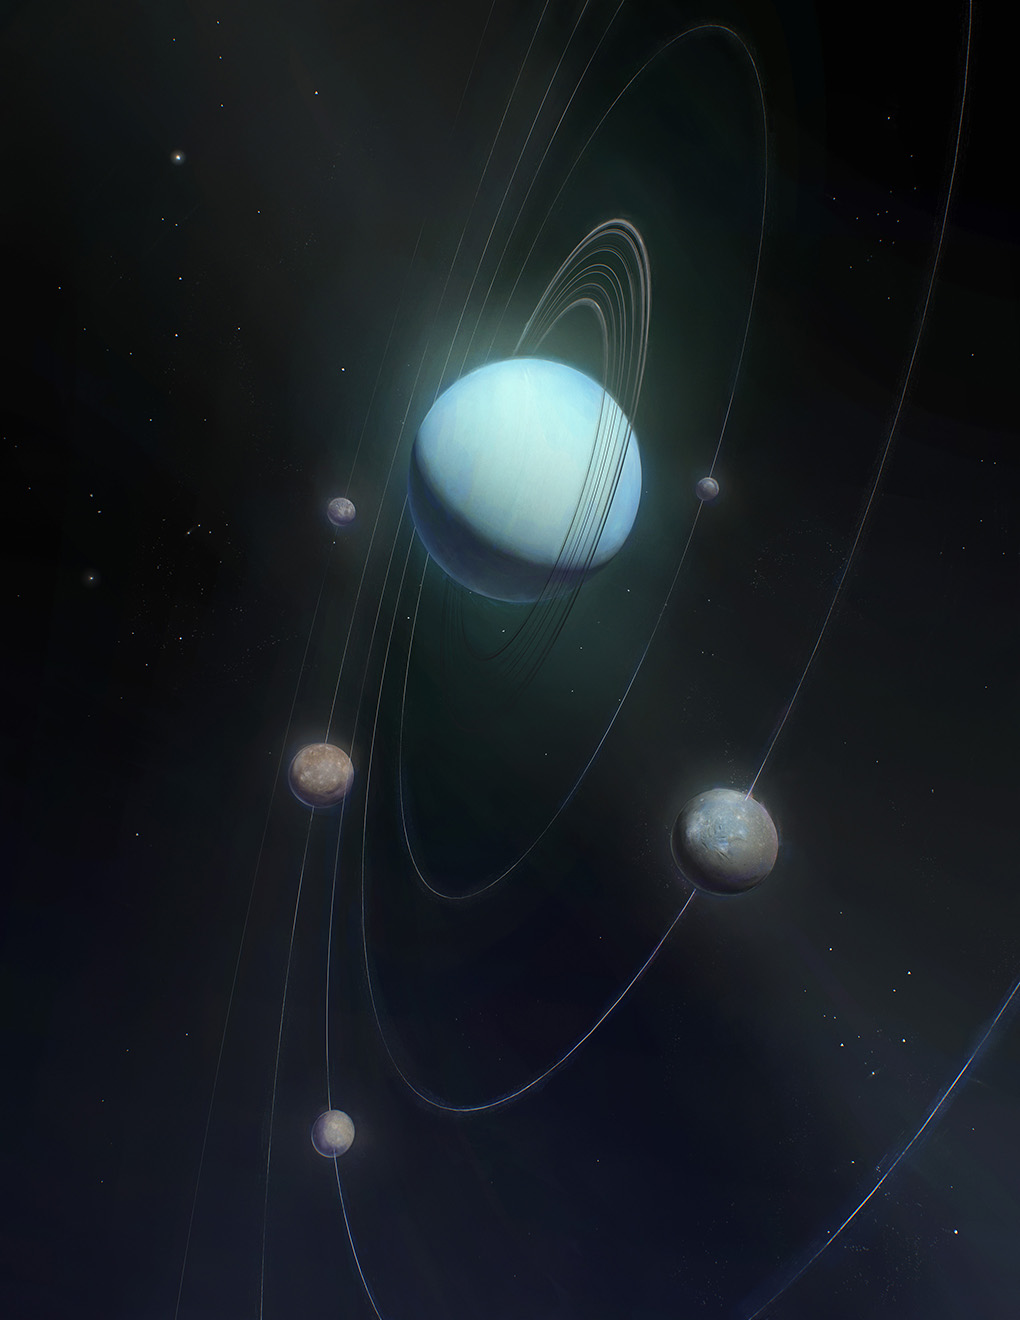 An artist’s impression of Uranus and its five largest moons